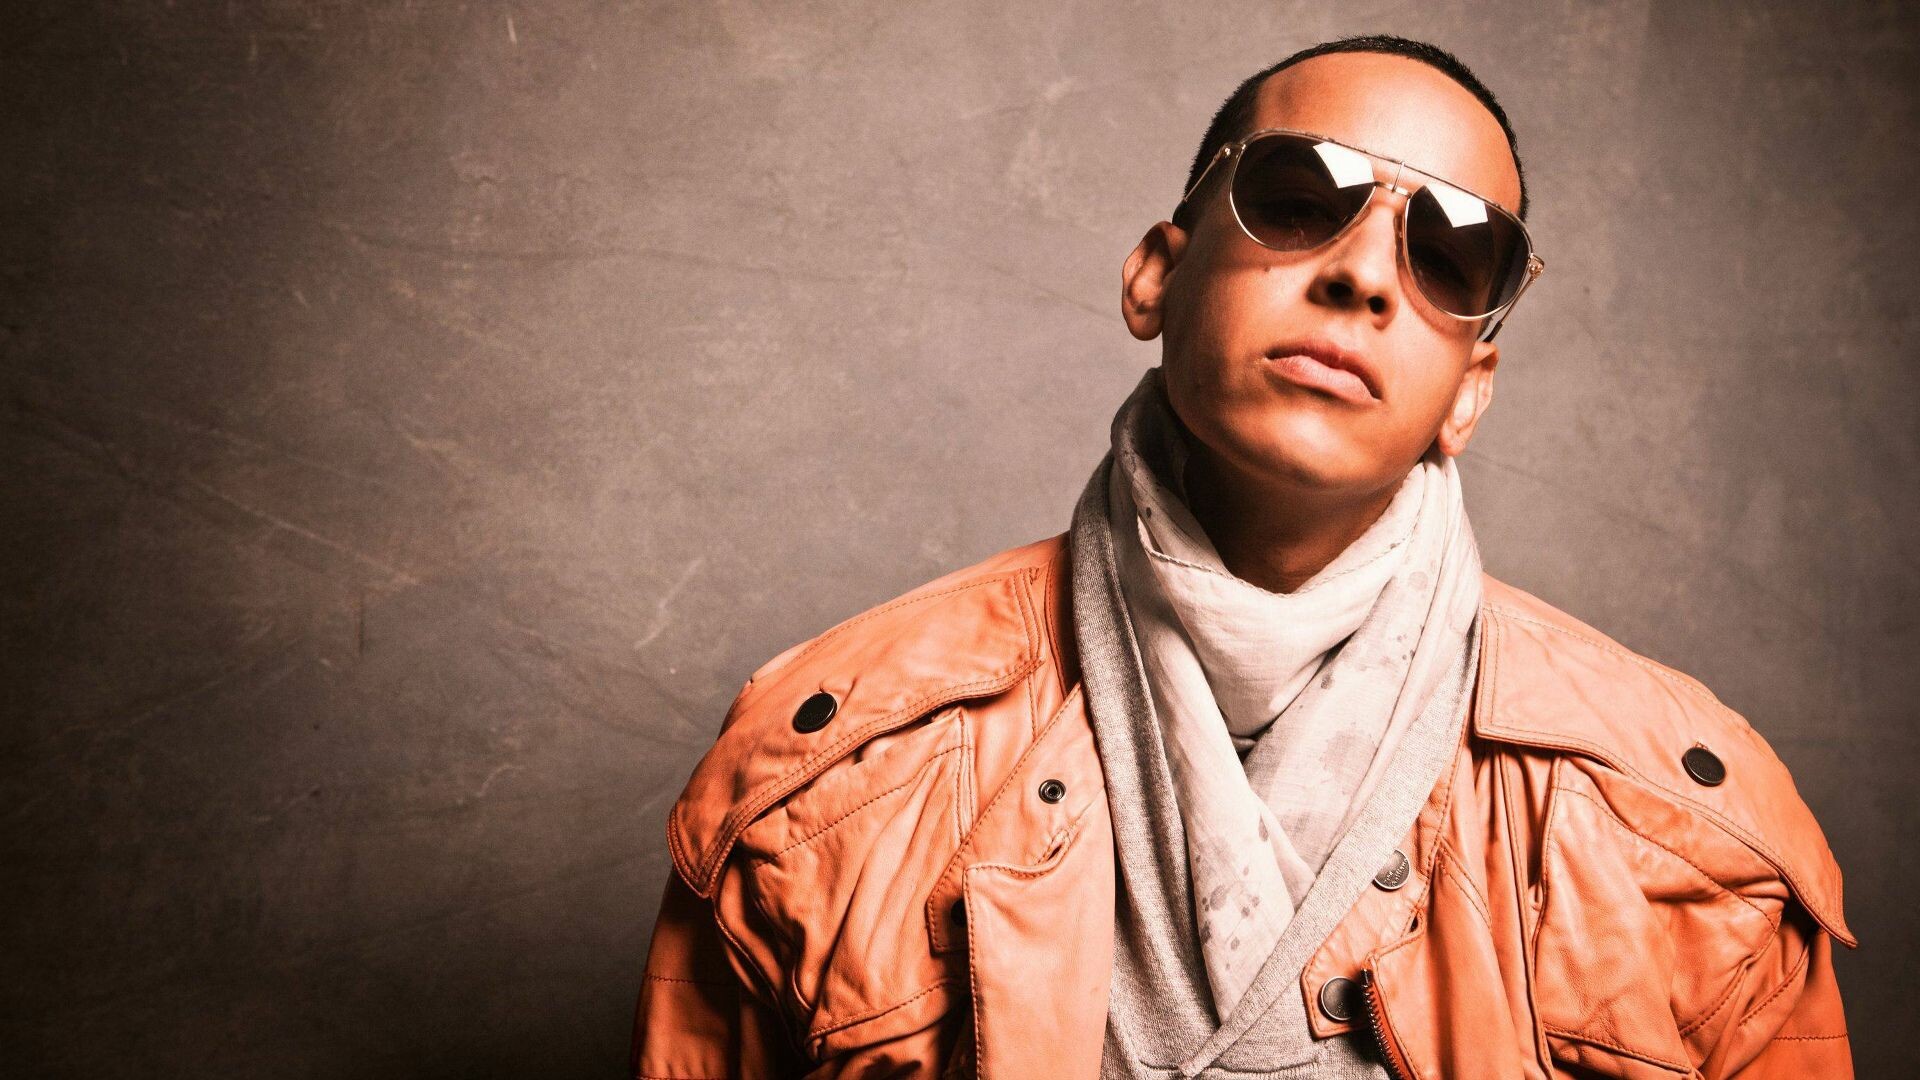 Daddy Yankee: El Cartel: The Big Boss was released by Interscope on June 5, 2007. 1920x1080 Full HD Background.